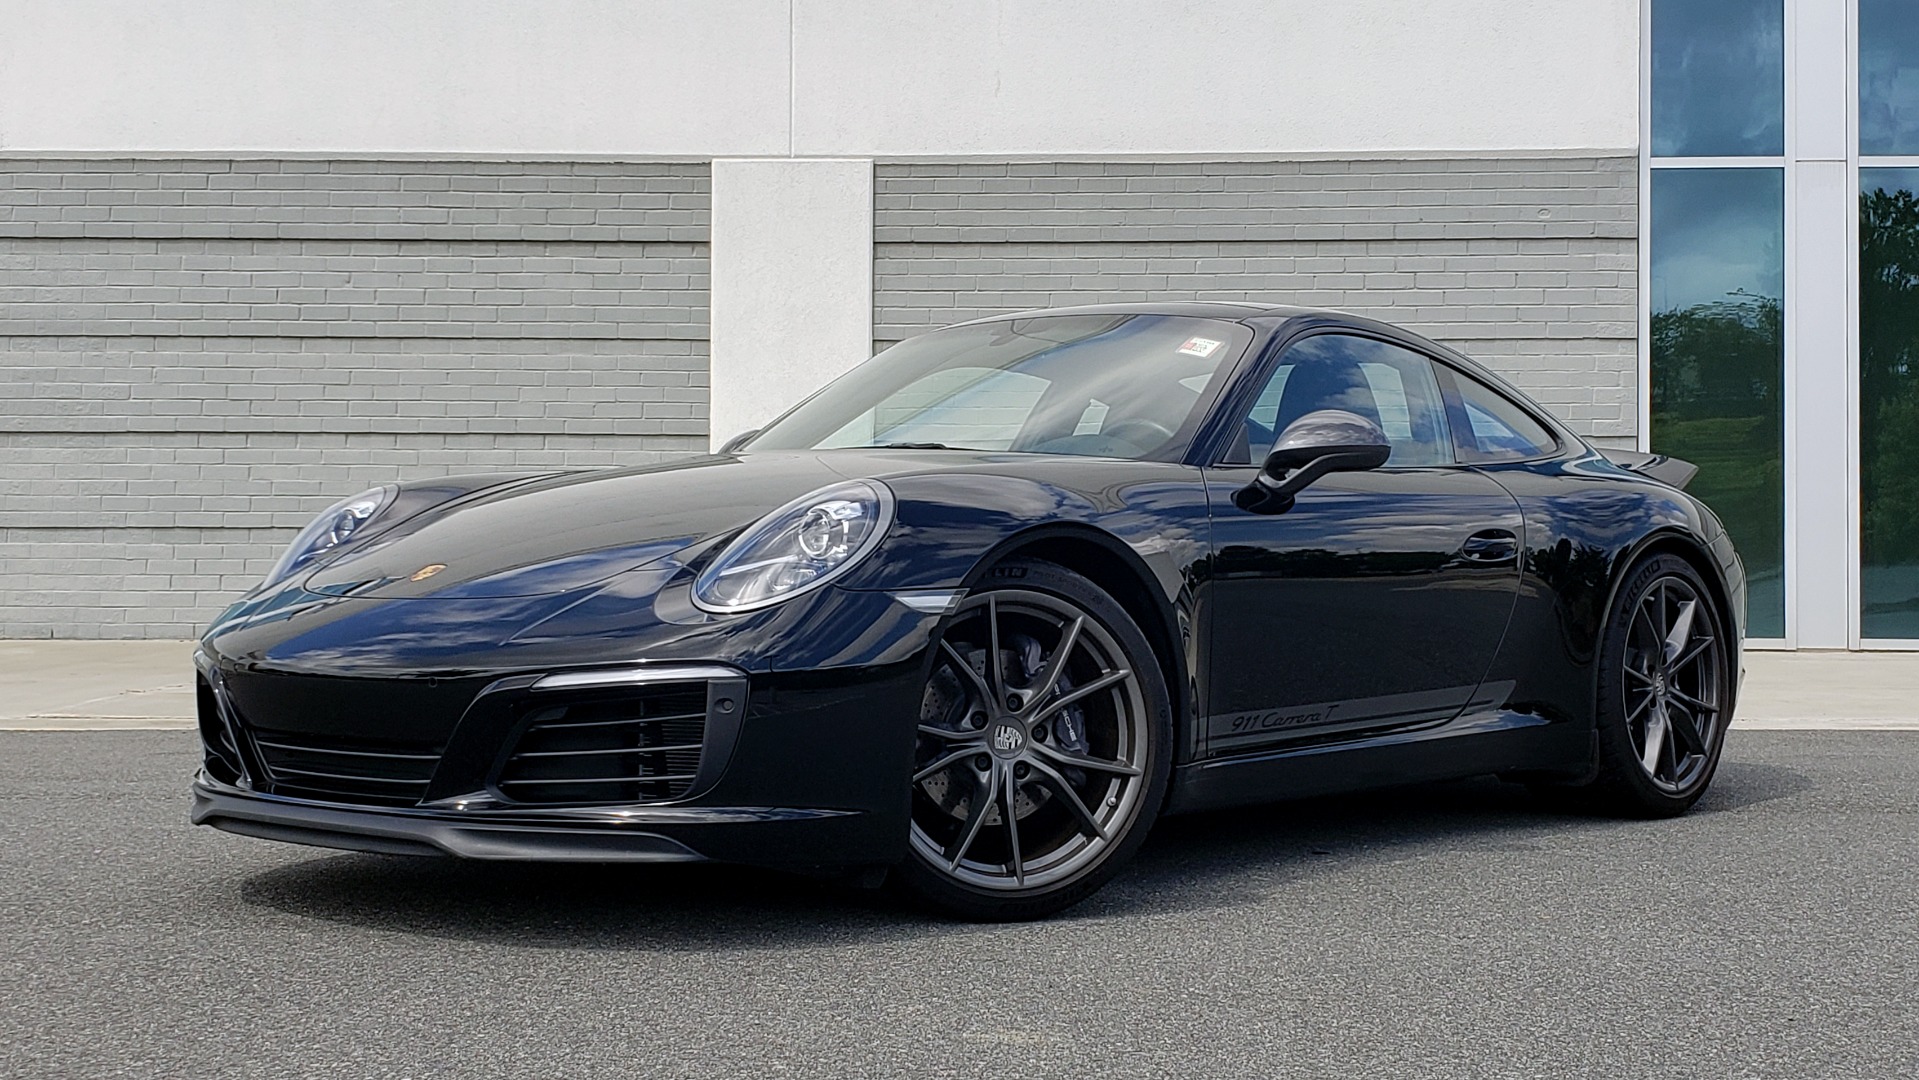 Used 2019 Porsche 911 CARRERA T / 3.0L H6 / MANUAL / PREMIUM / NAV / BOSE / SUNROOF / REARVIEW for sale Sold at Formula Imports in Charlotte NC 28227 1